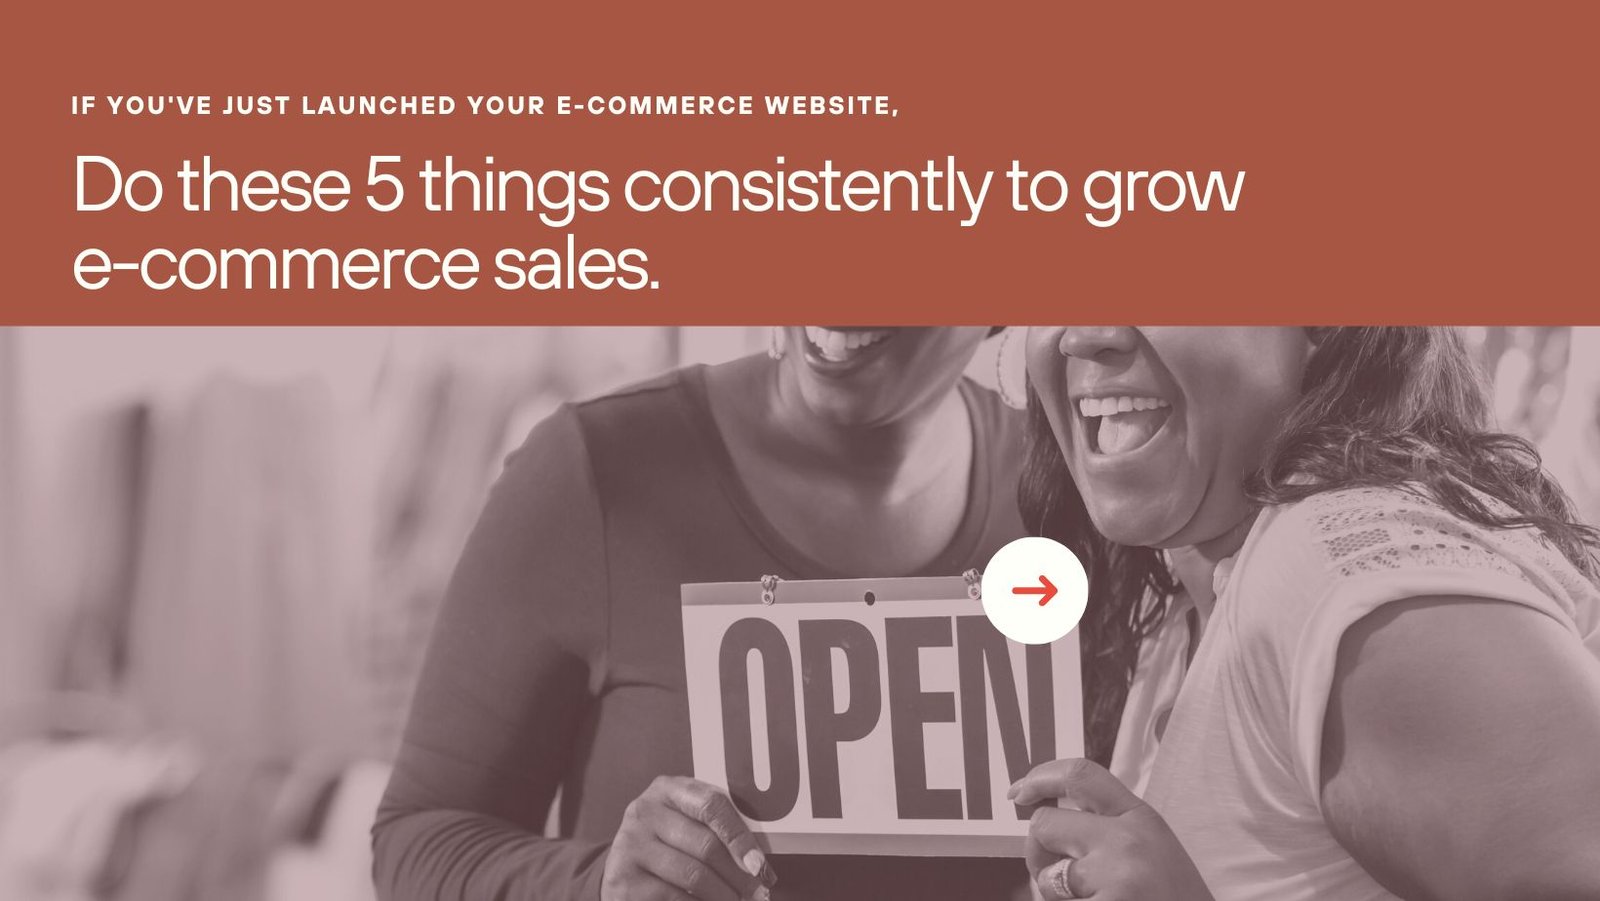 From Launch to Success: 5 Must-Do’s for New E-commerce Websites